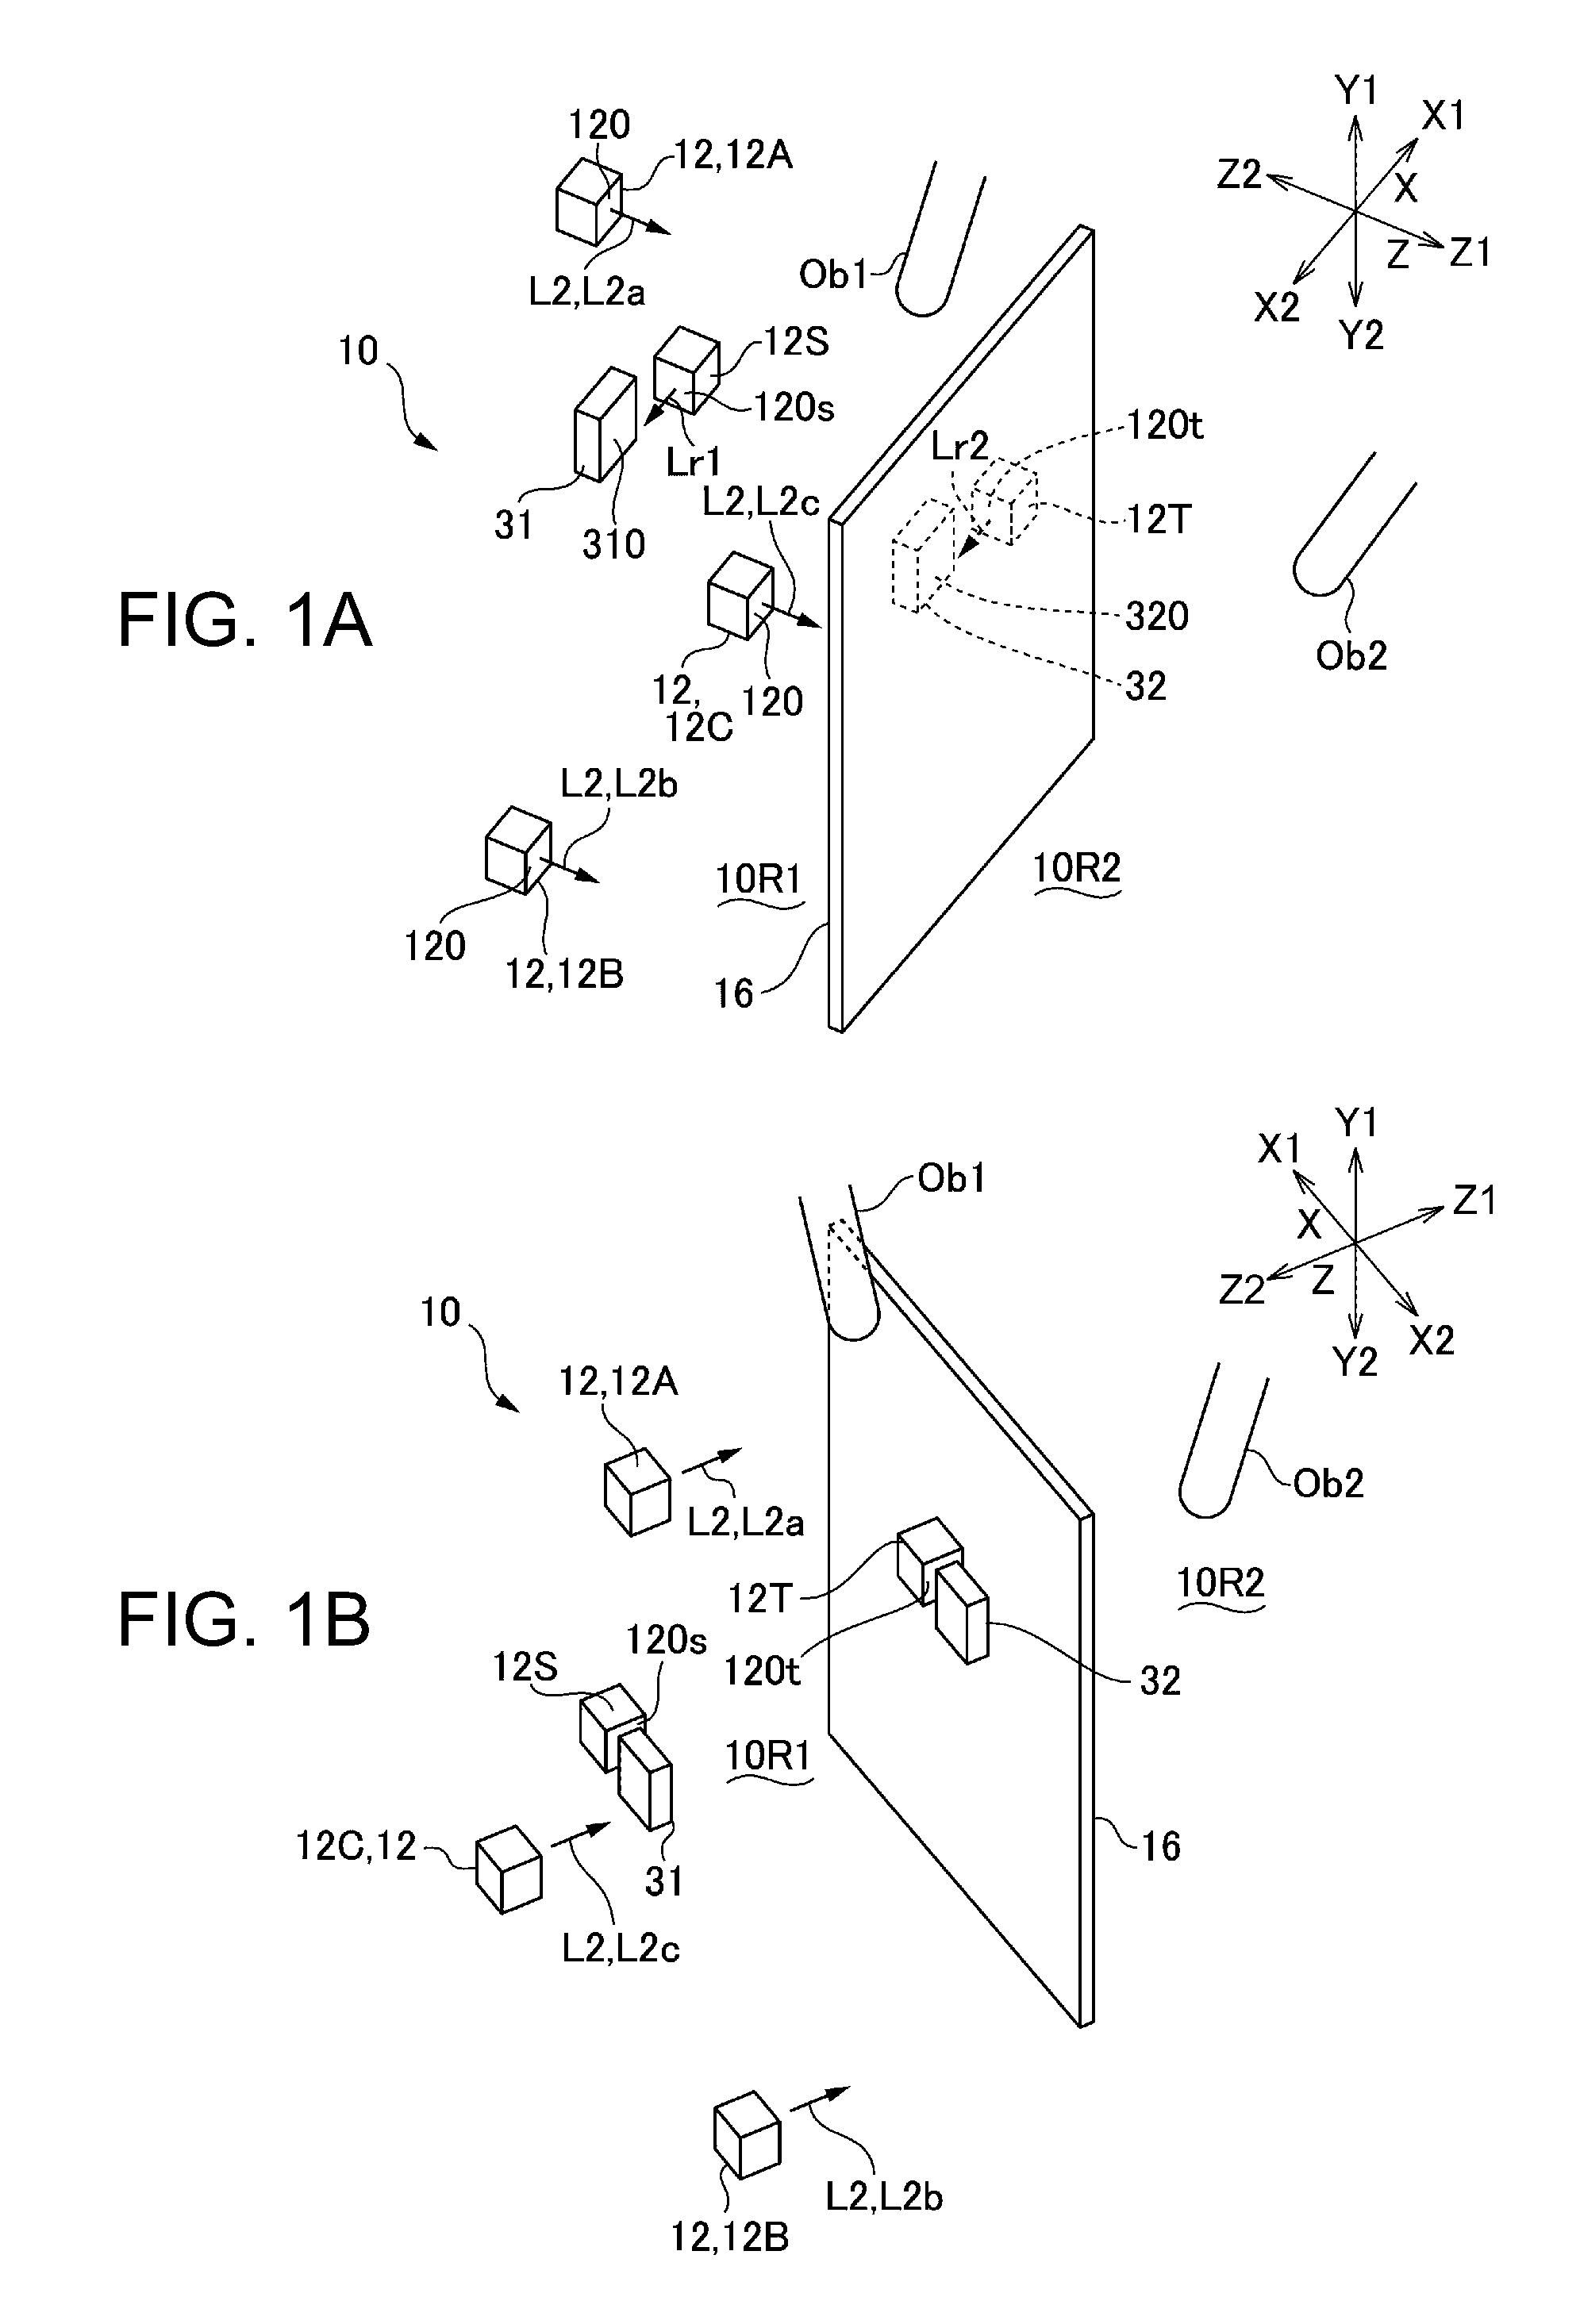 Optical position detection device